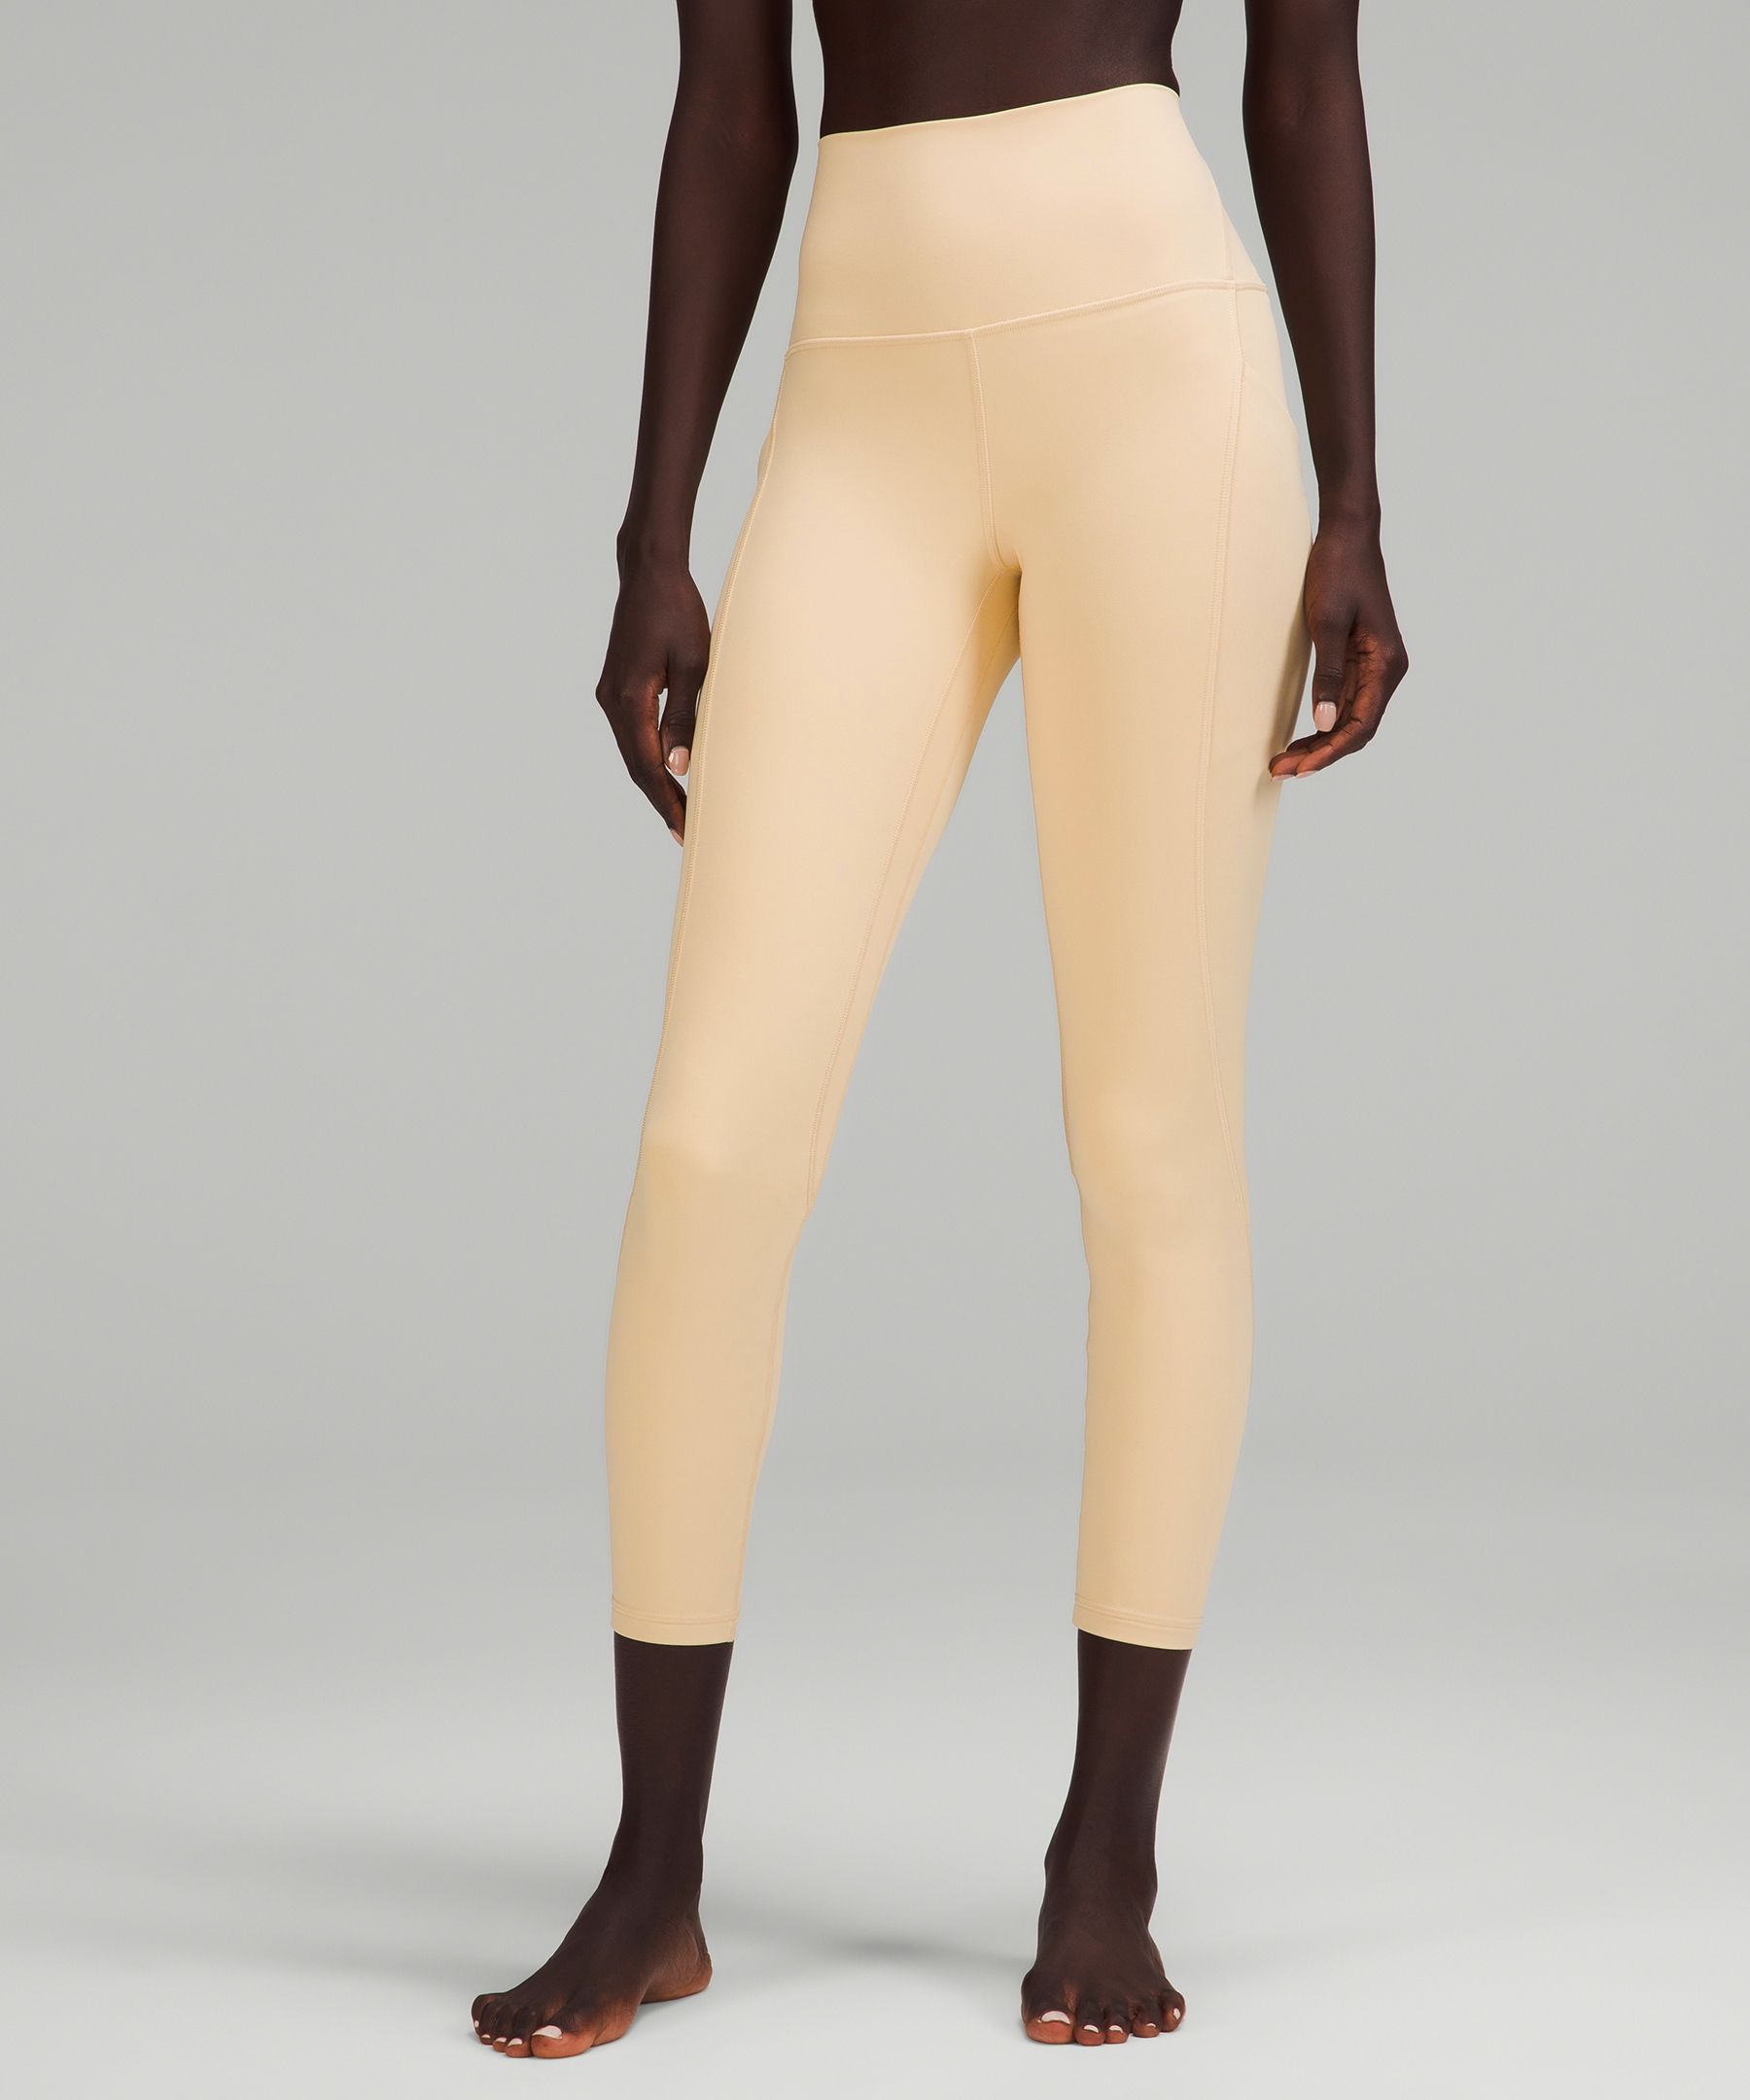 Lululemon Align™ High-rise Leggings With Pockets 25" In Prosecco